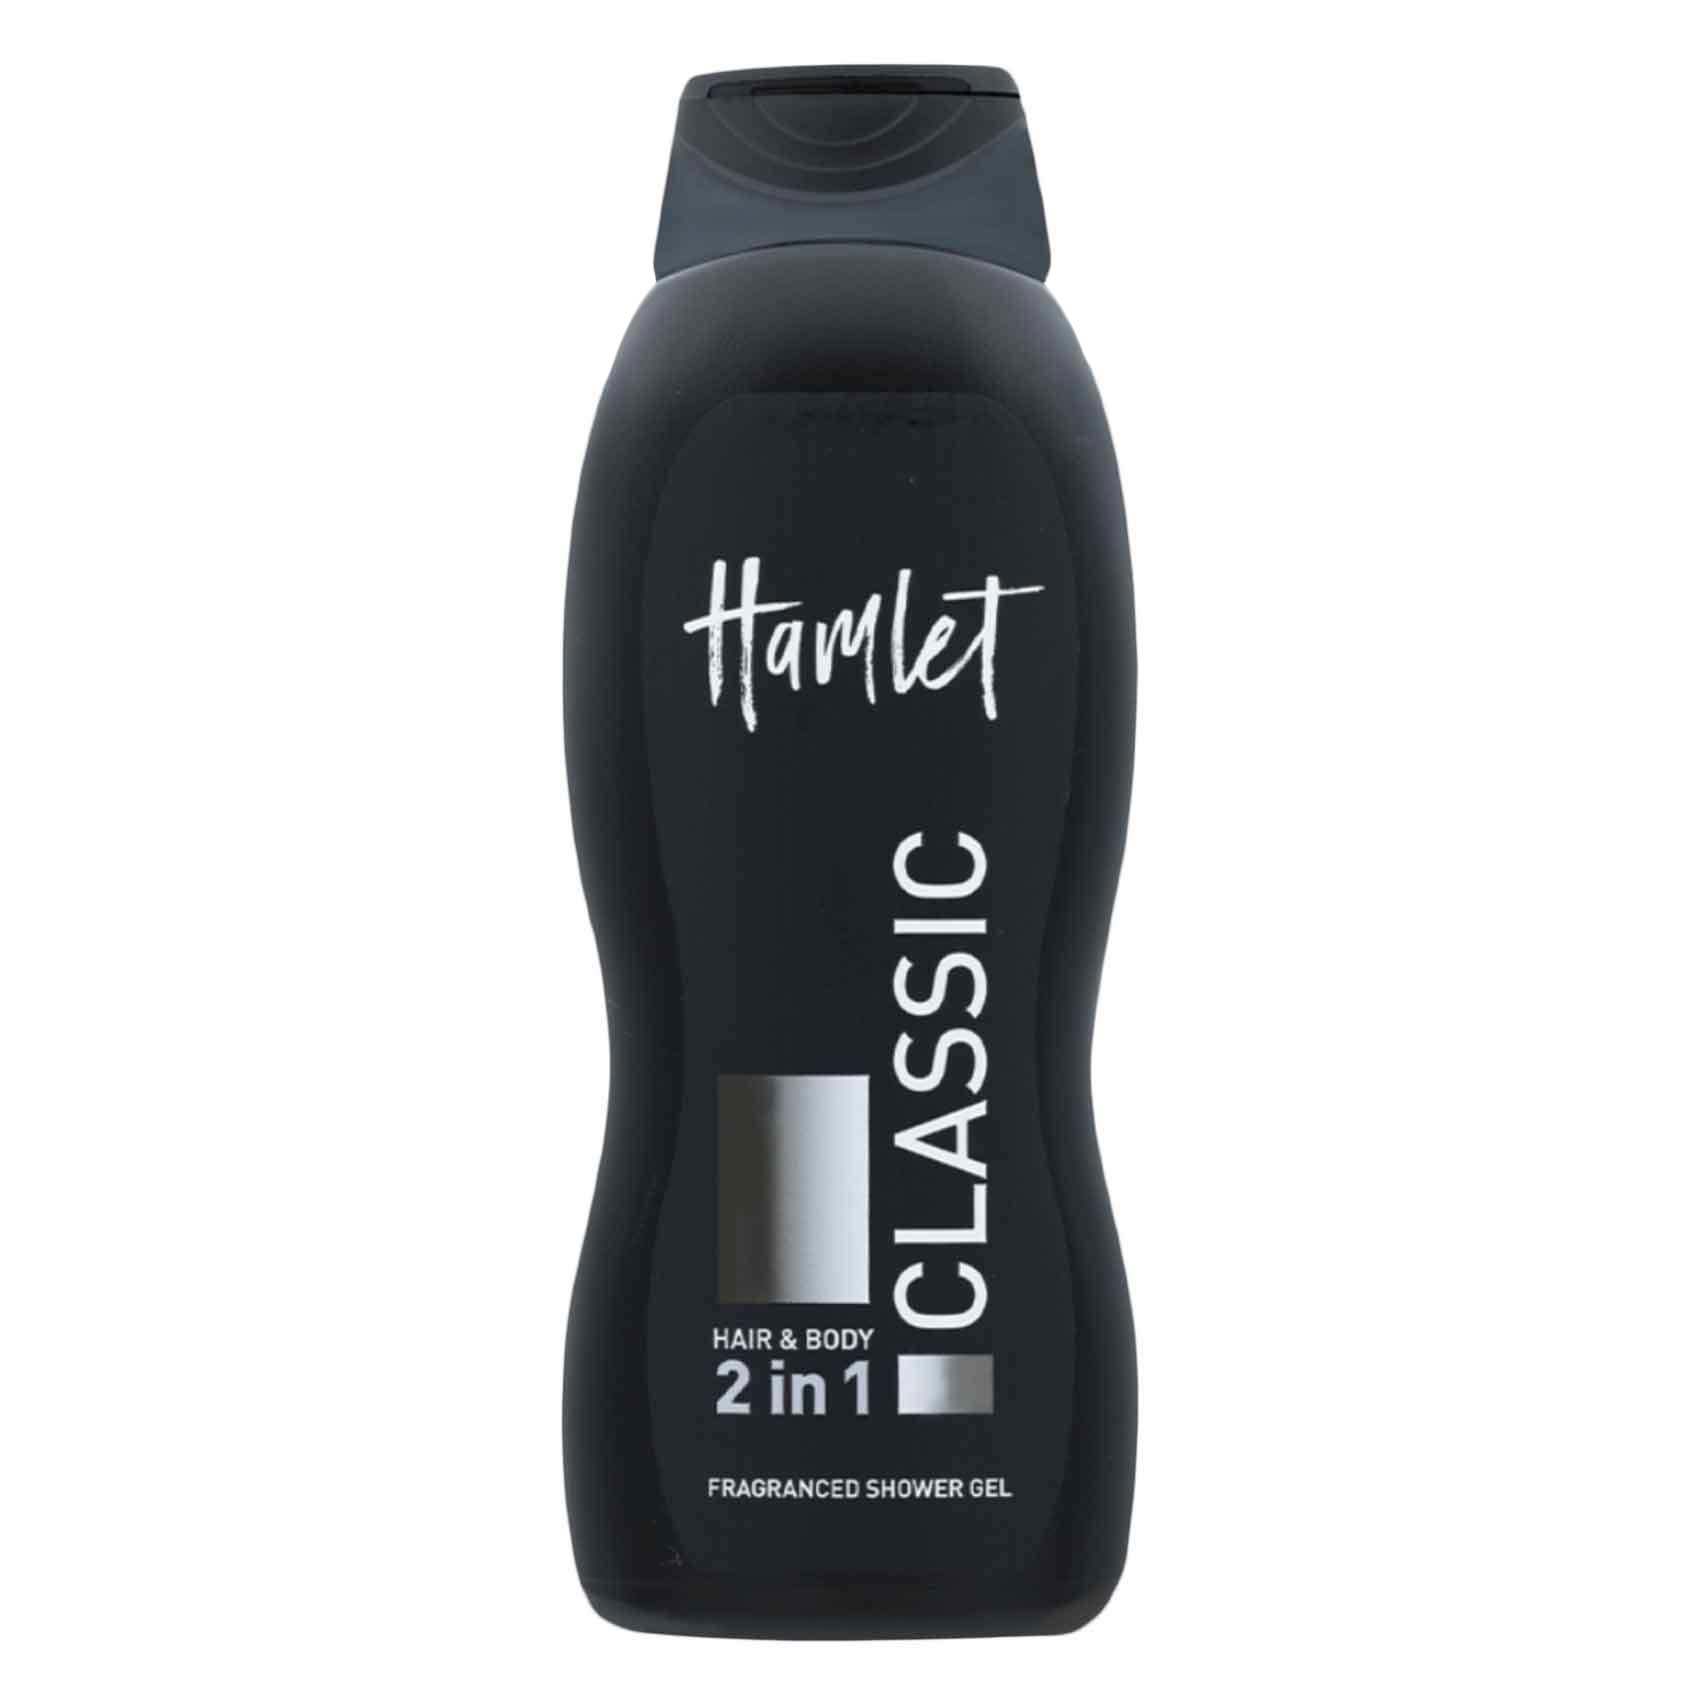 Hamlet Classic 2 In 1 Hair And Body Shower Gel 650ml